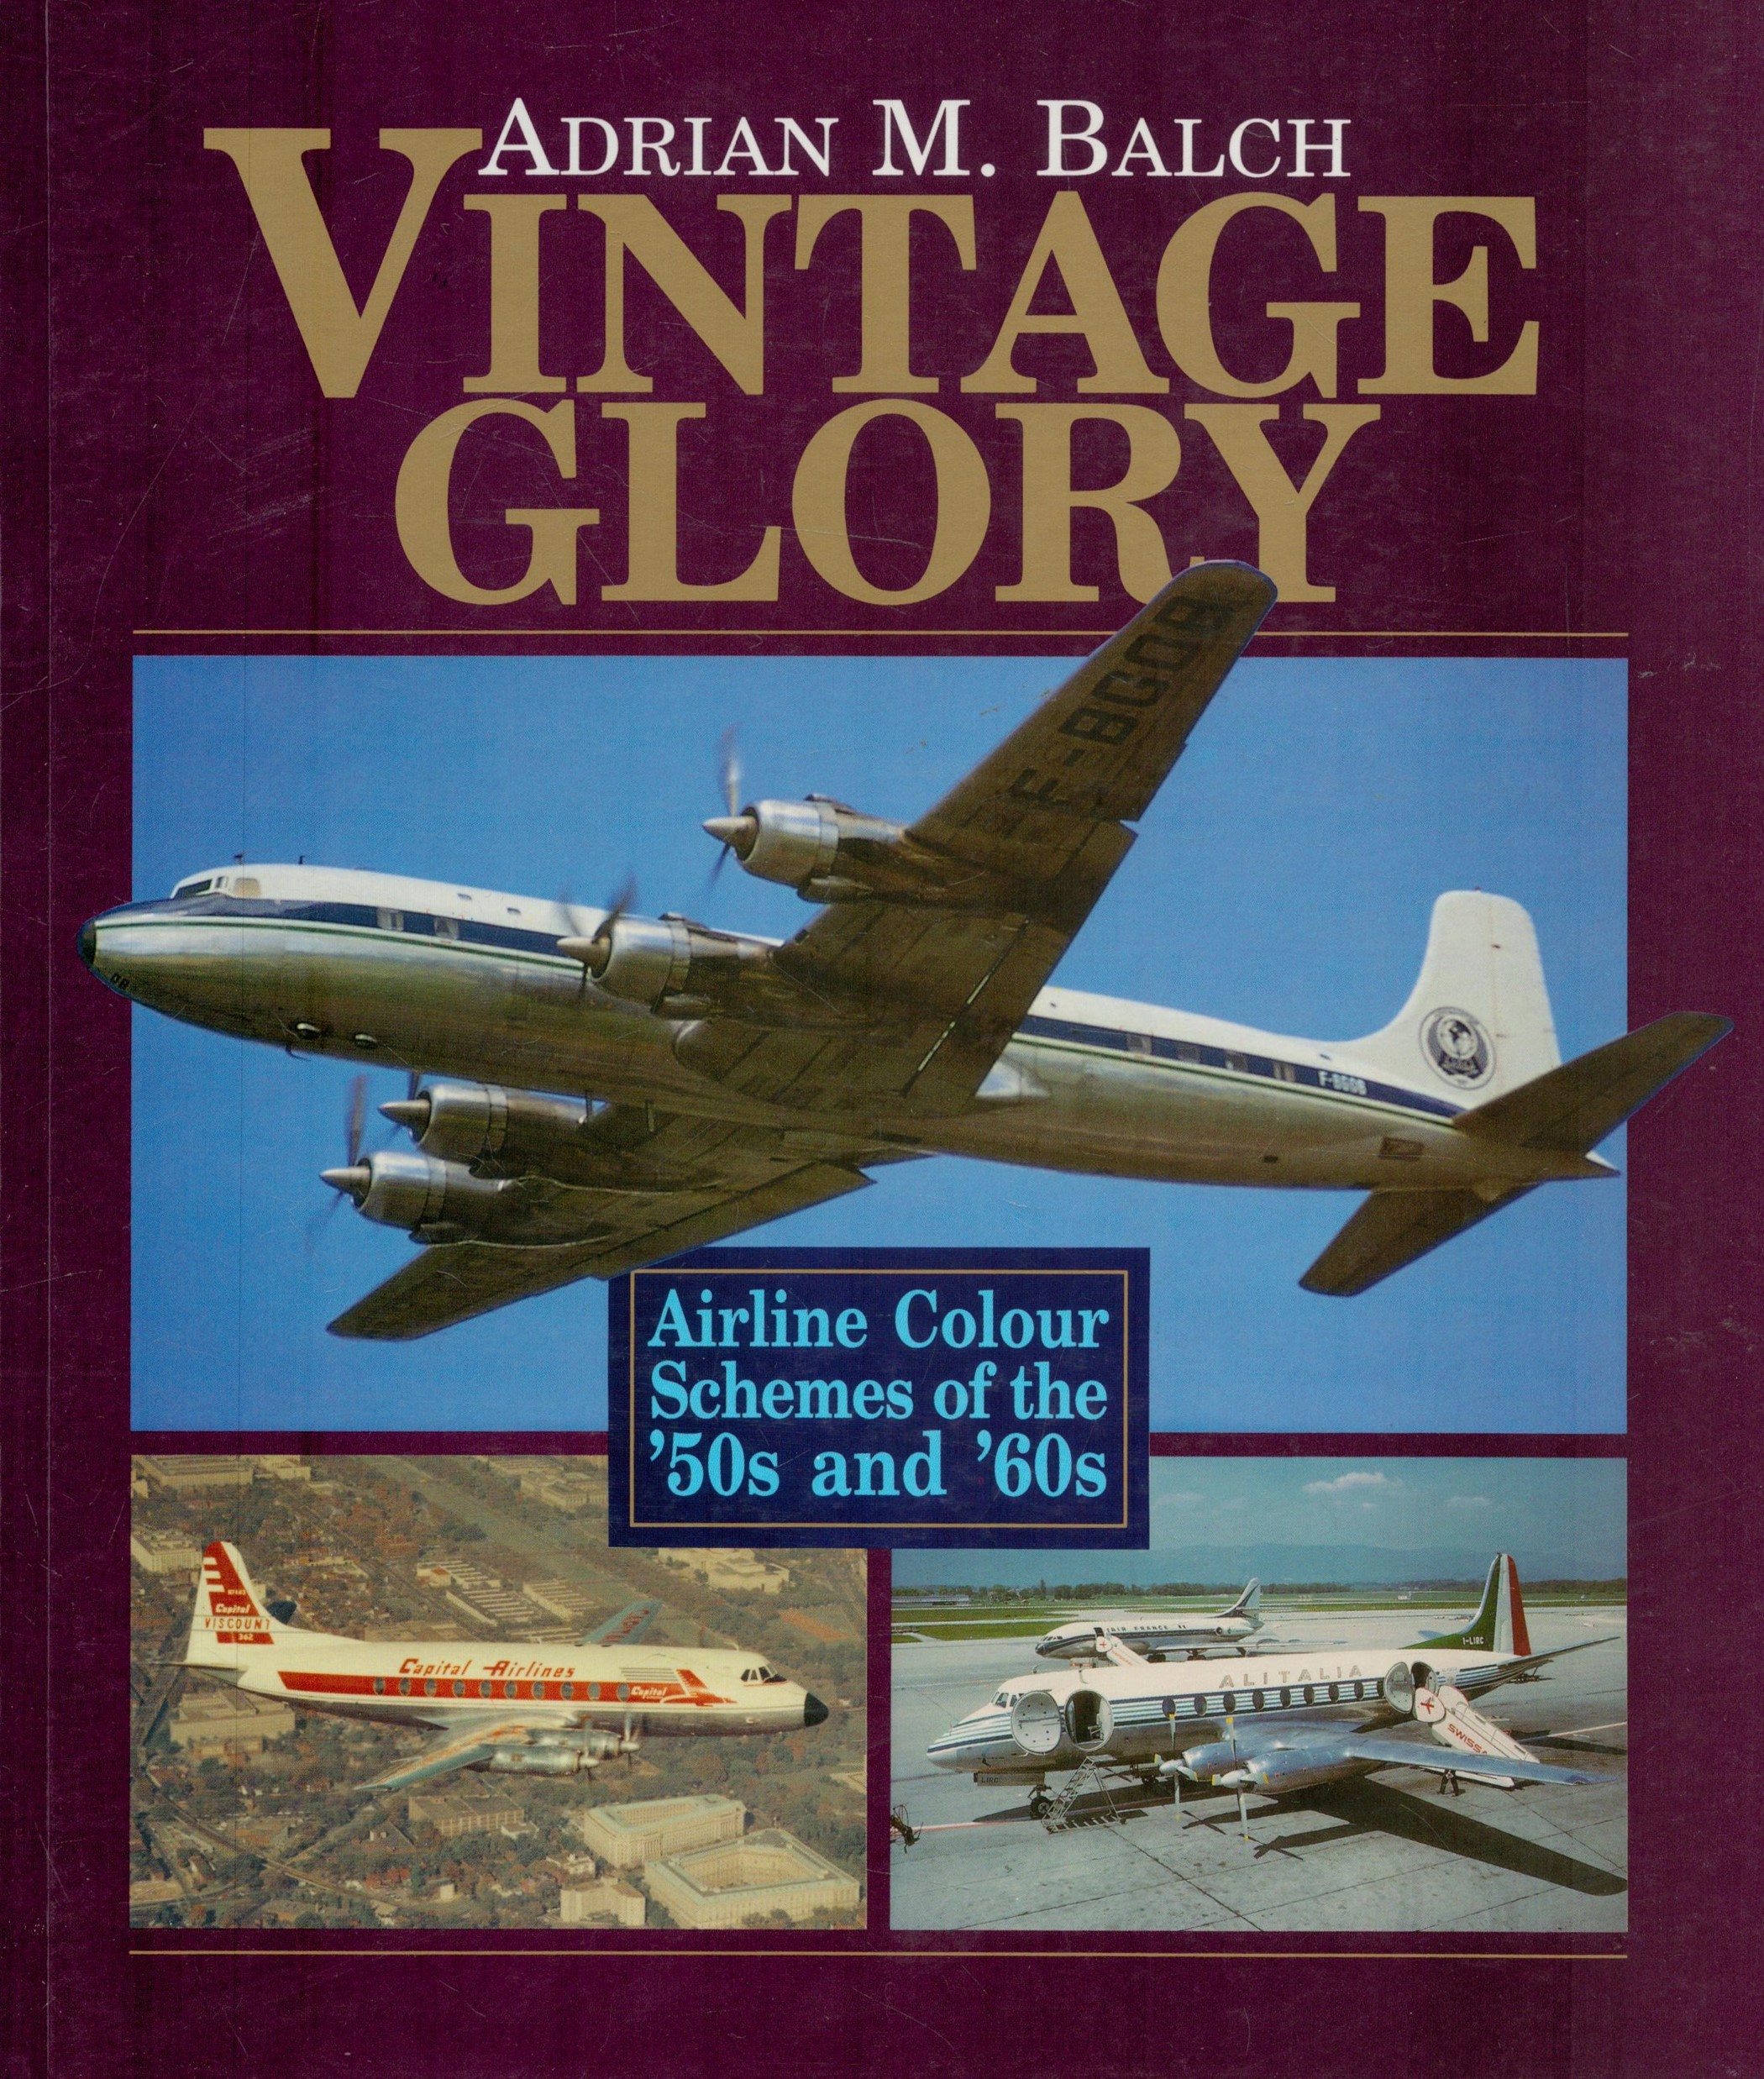 Airliners of the 50s, 60s and 70s, Publications Include Vintage Glory - Airline Colour Schemes of - Image 2 of 6